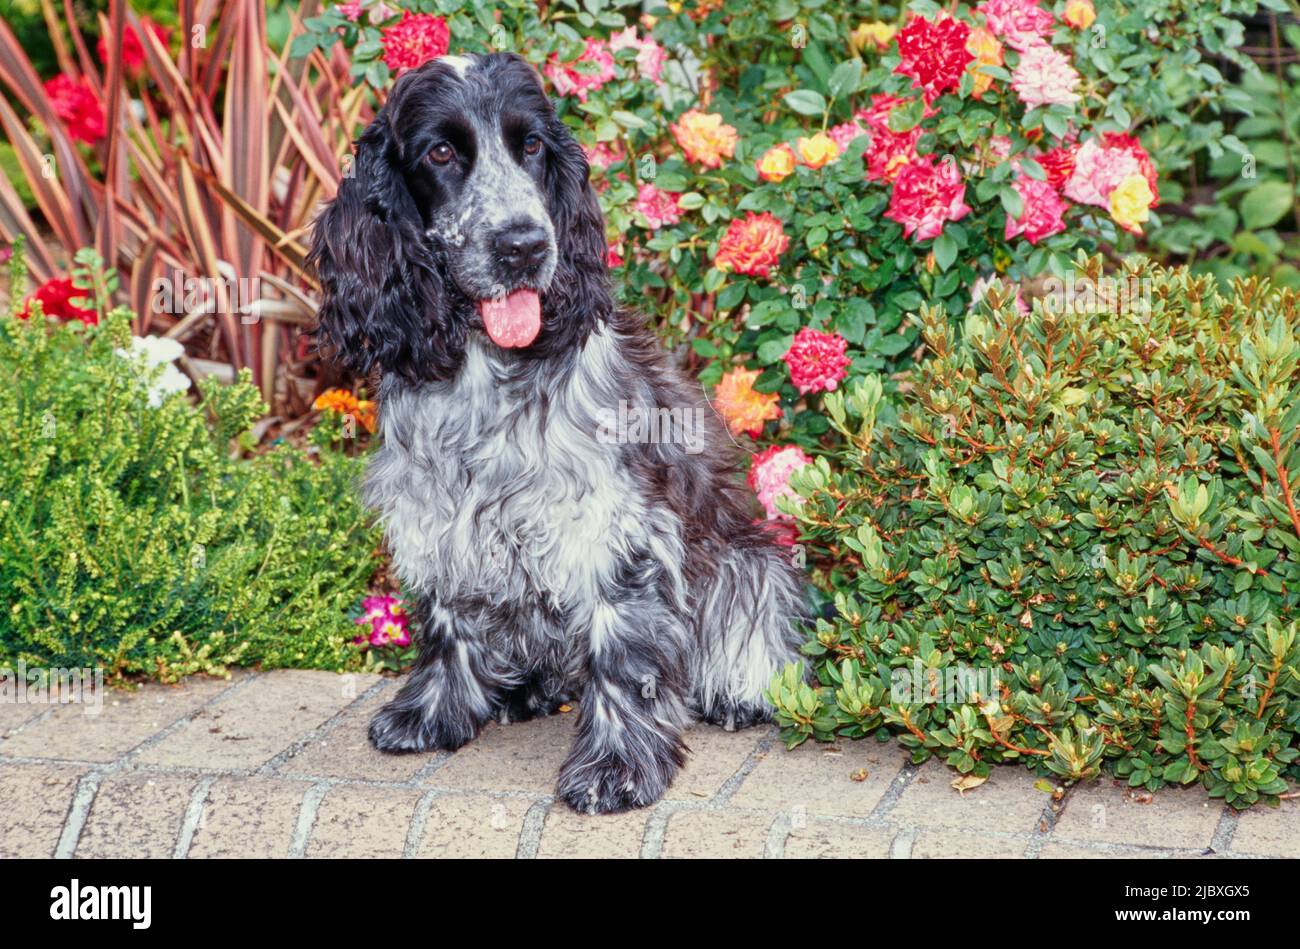 A blue roan English cocker spaniel sitting on a brick planter with red orange and yellow flowers behind Stock Photo